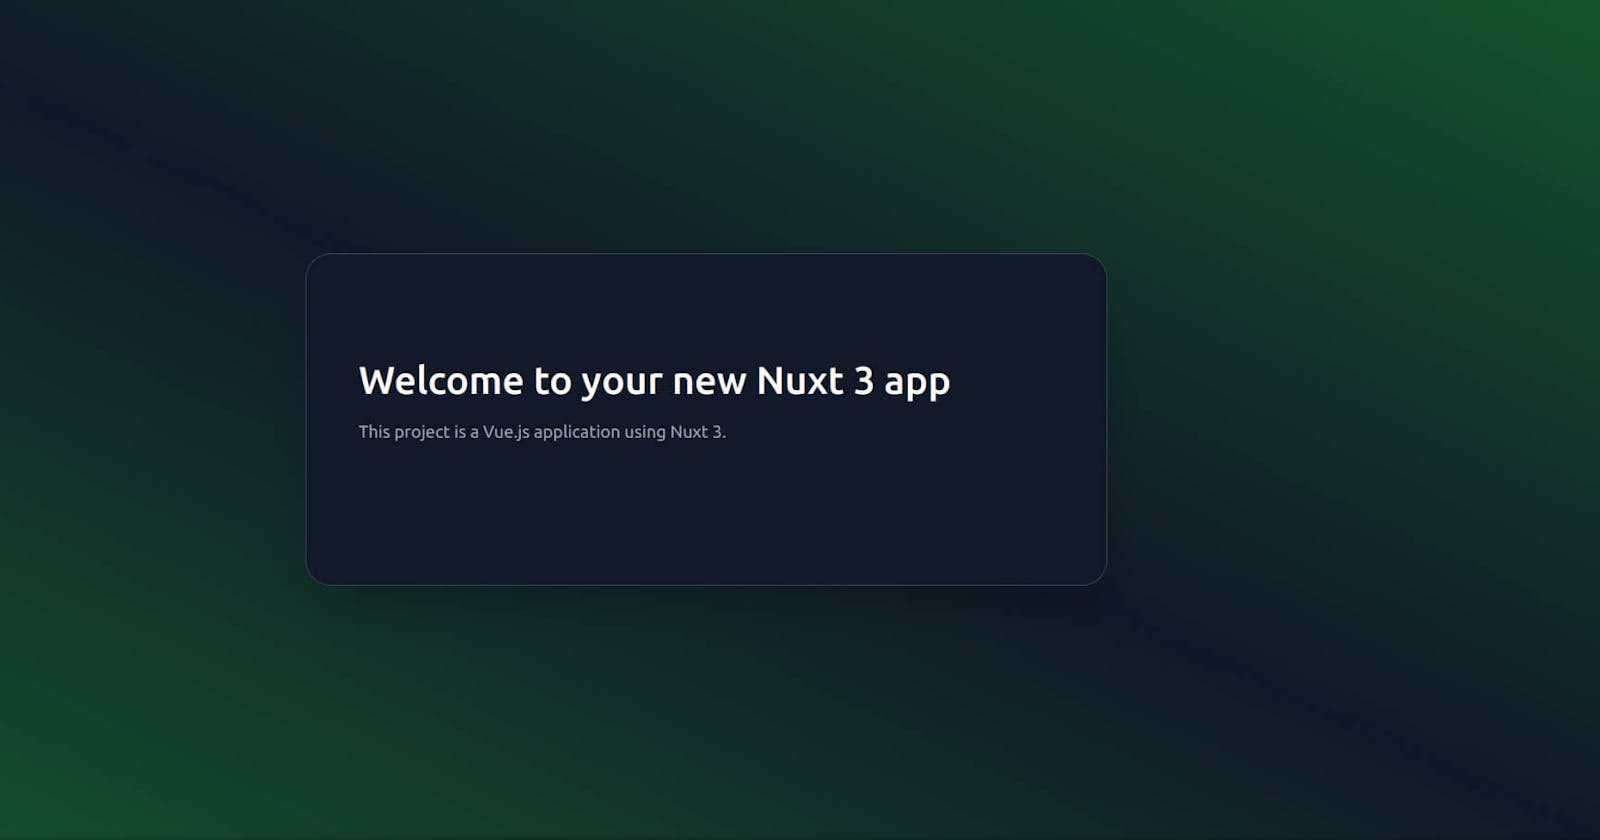 How to setup Nuxt 3 with Tailwind CSS, Pinia and Supabase